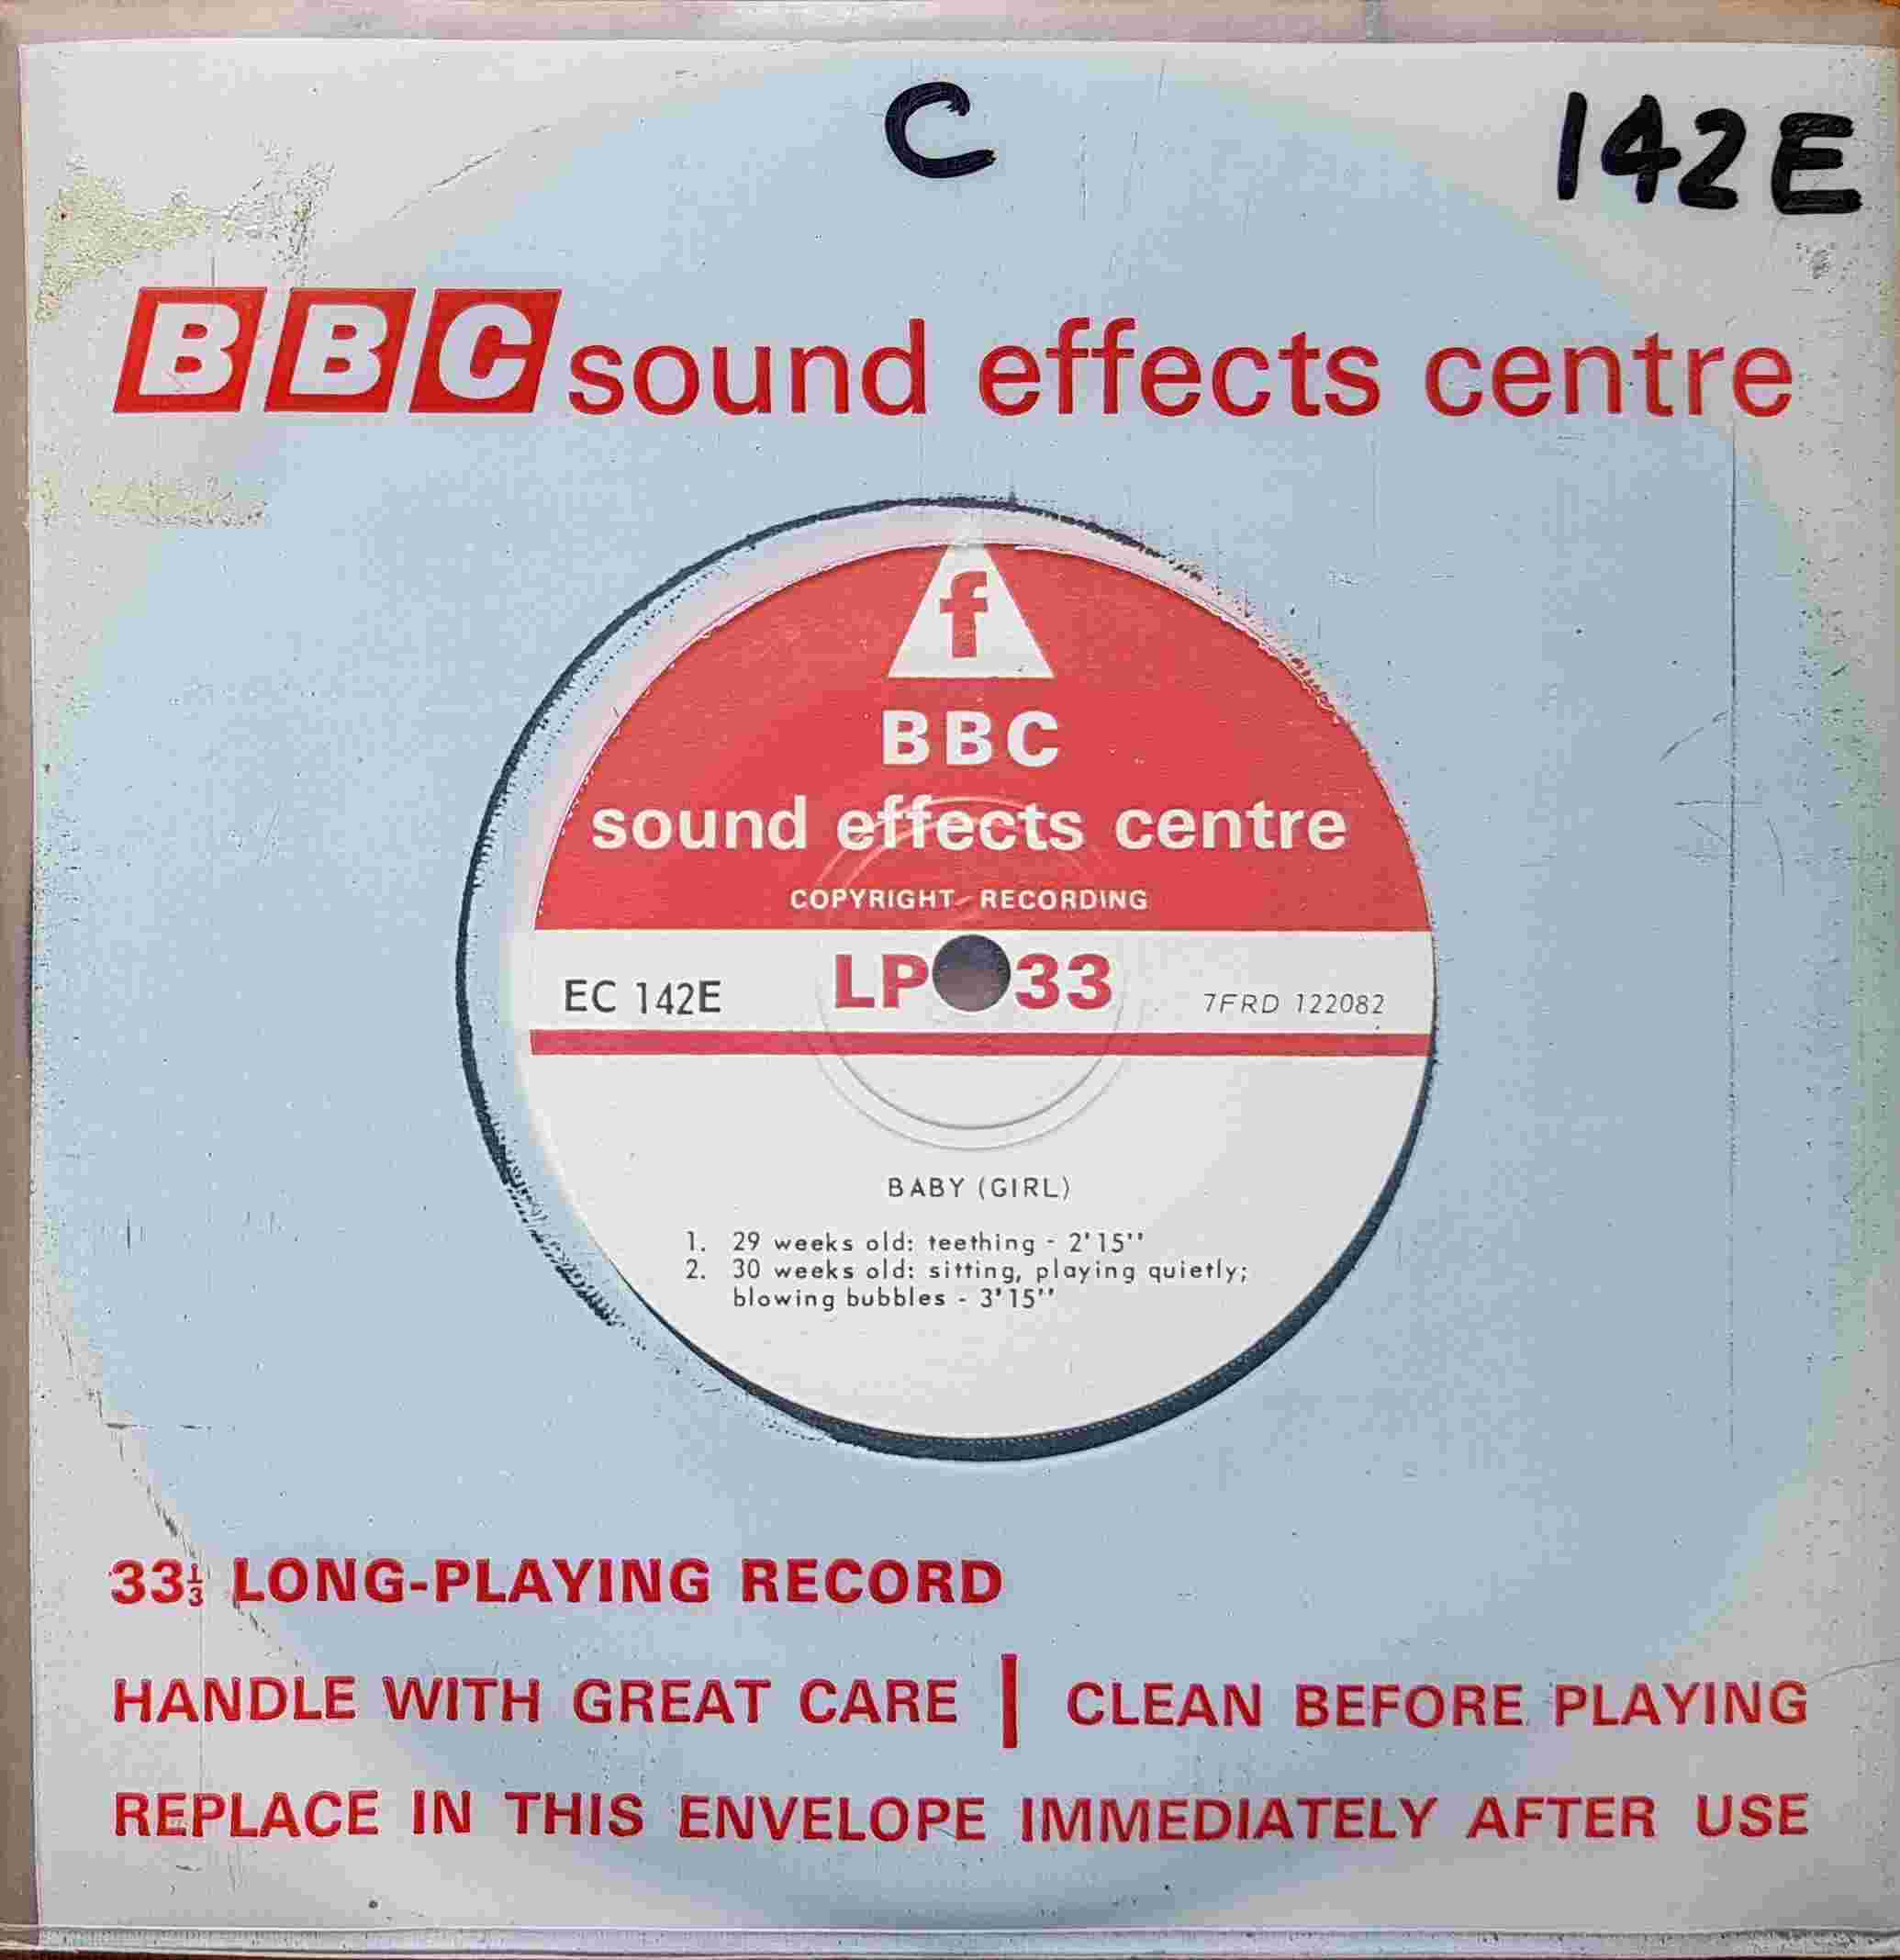 Picture of EC 142E Baby (Girl) by artist Not registered from the BBC singles - Records and Tapes library